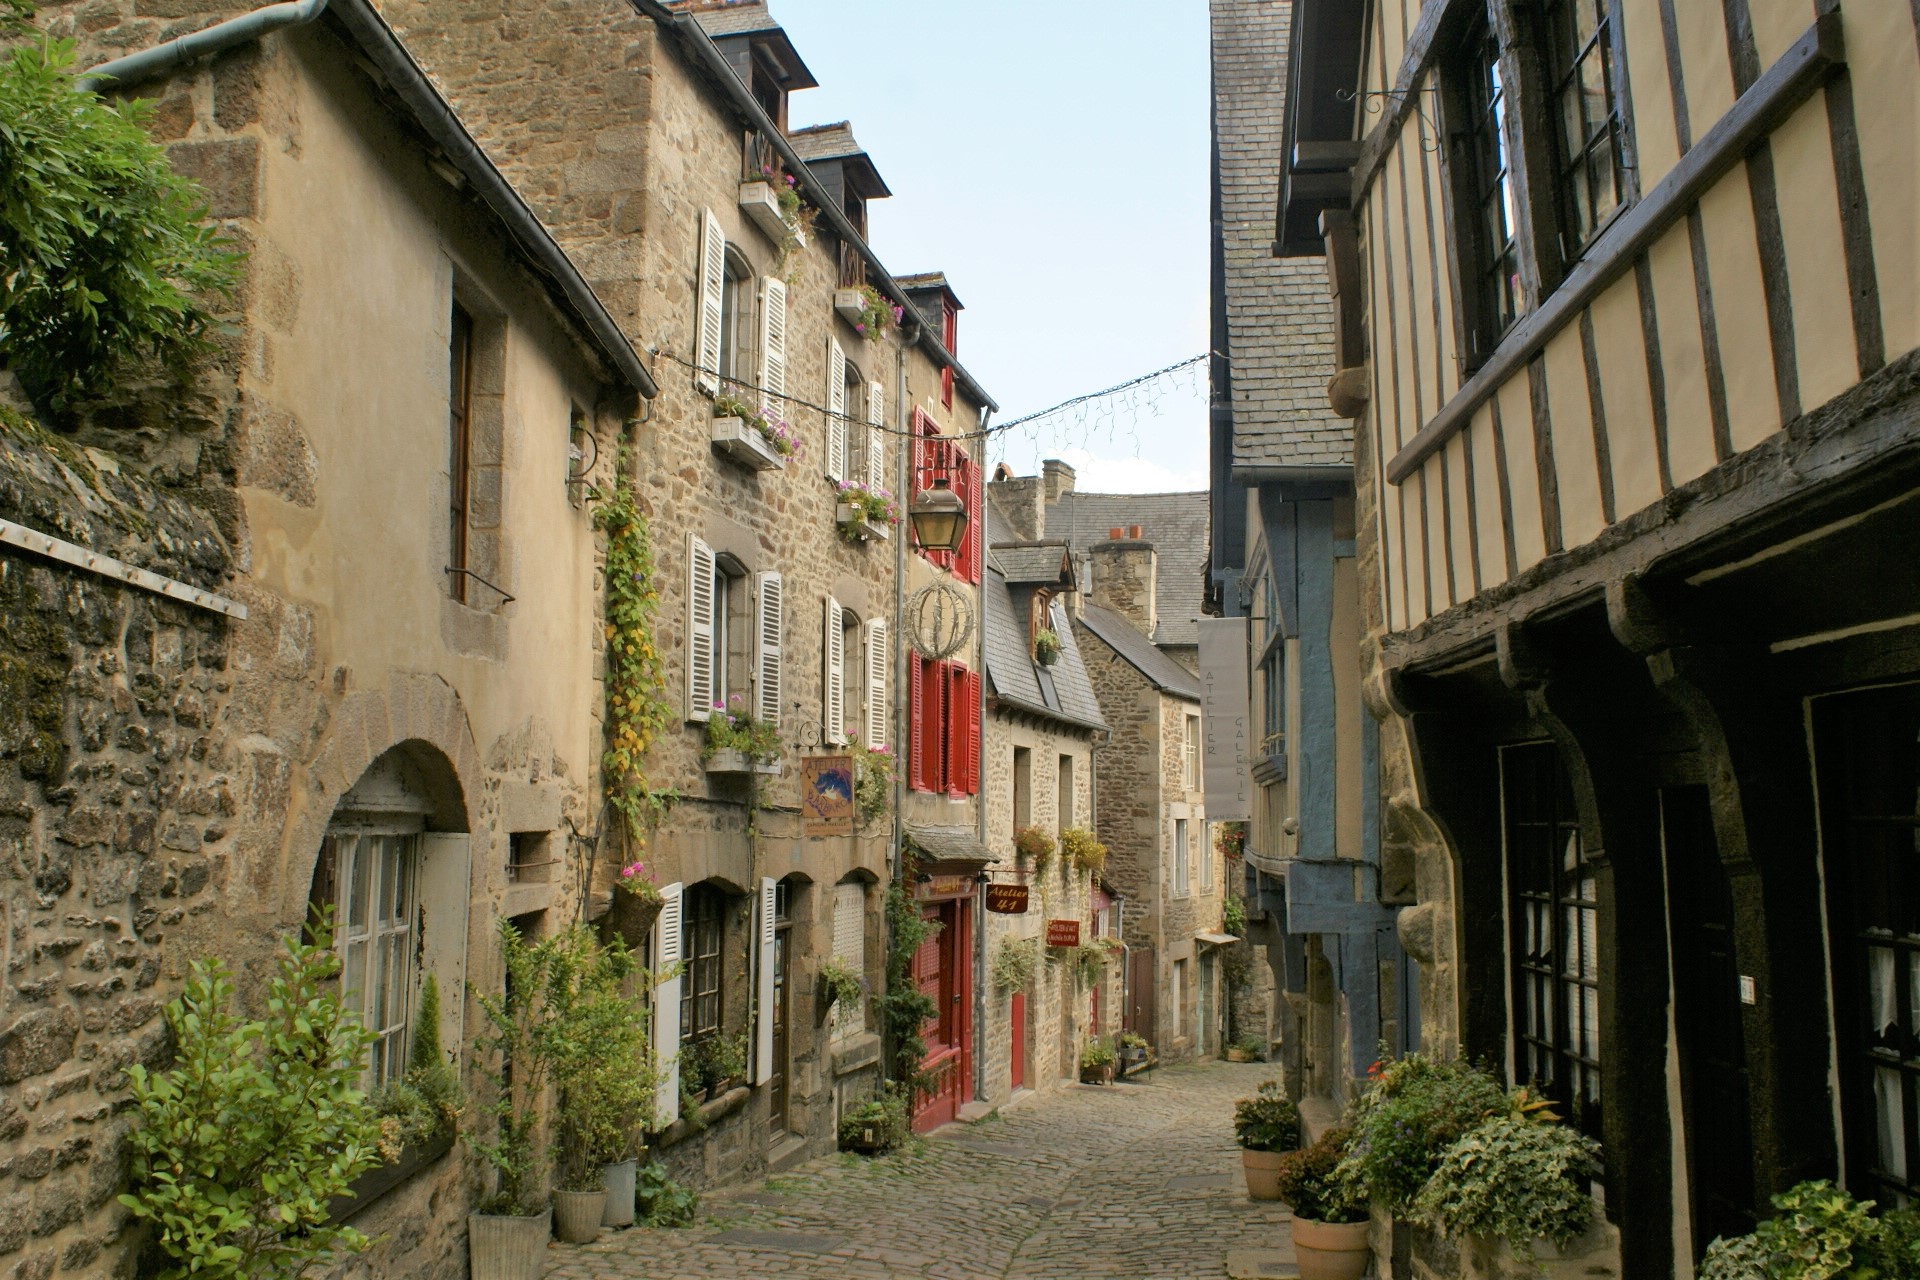 Dinan in Brittany